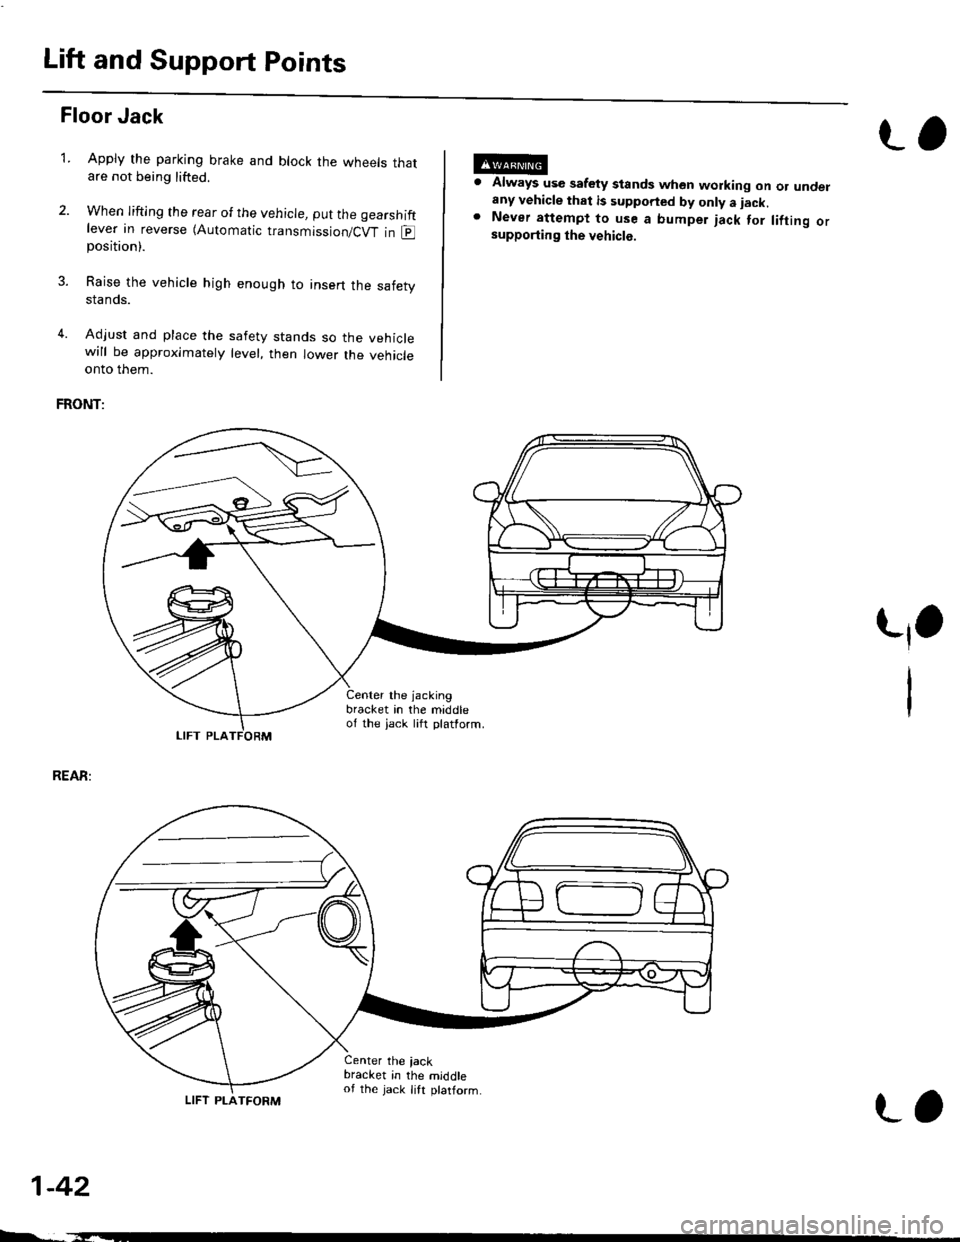 HONDA CIVIC 1999 6.G Workshop Manual Lift and Support Points
Floor Jack
Apply the parking brake and block the wheets thatare not being lifted.
When lifting the rear of the vehicle, put the gearshiftlever in reverse (Automatic transmissio